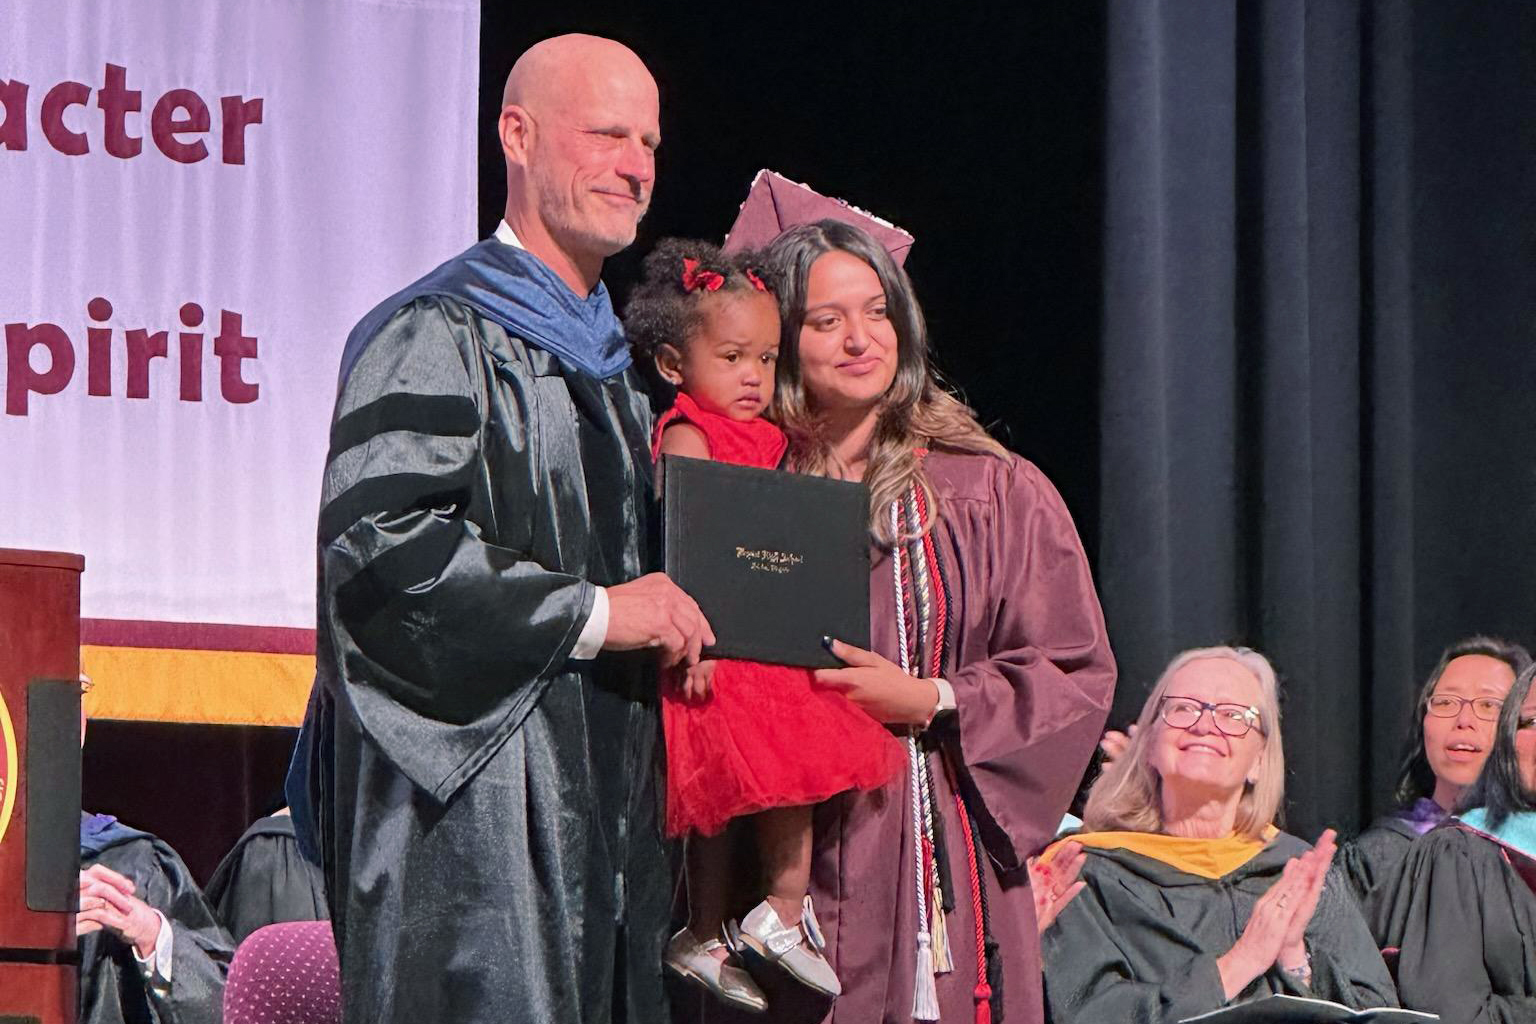 Newly-minted Bryant High School graduate Anyeli Salguero receives her diploma from principal Chris Larrick with her 20-month-old daughter in her arms.